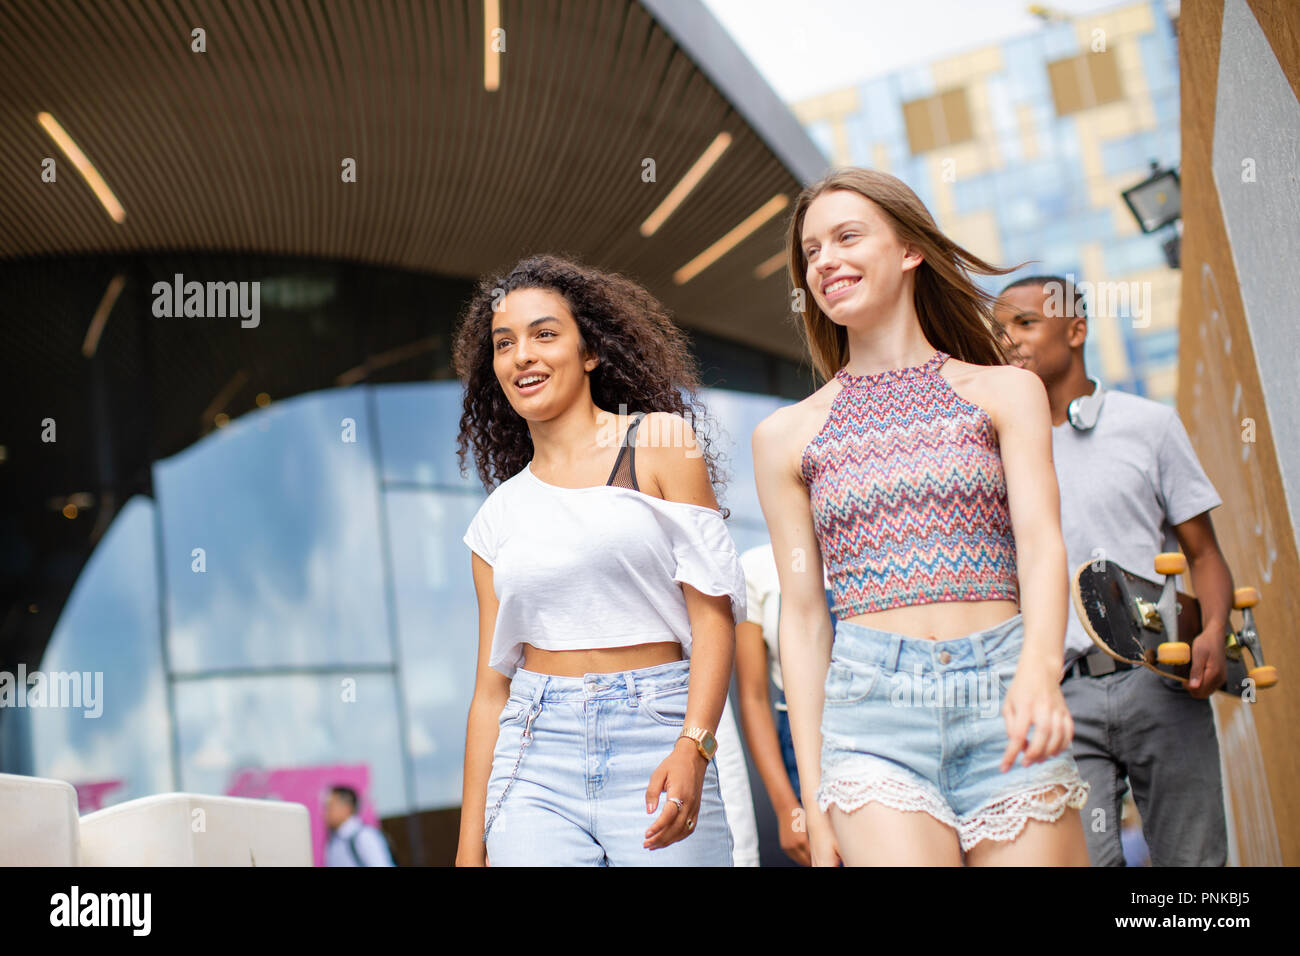 Group of teenagers walking through city Stock Photo